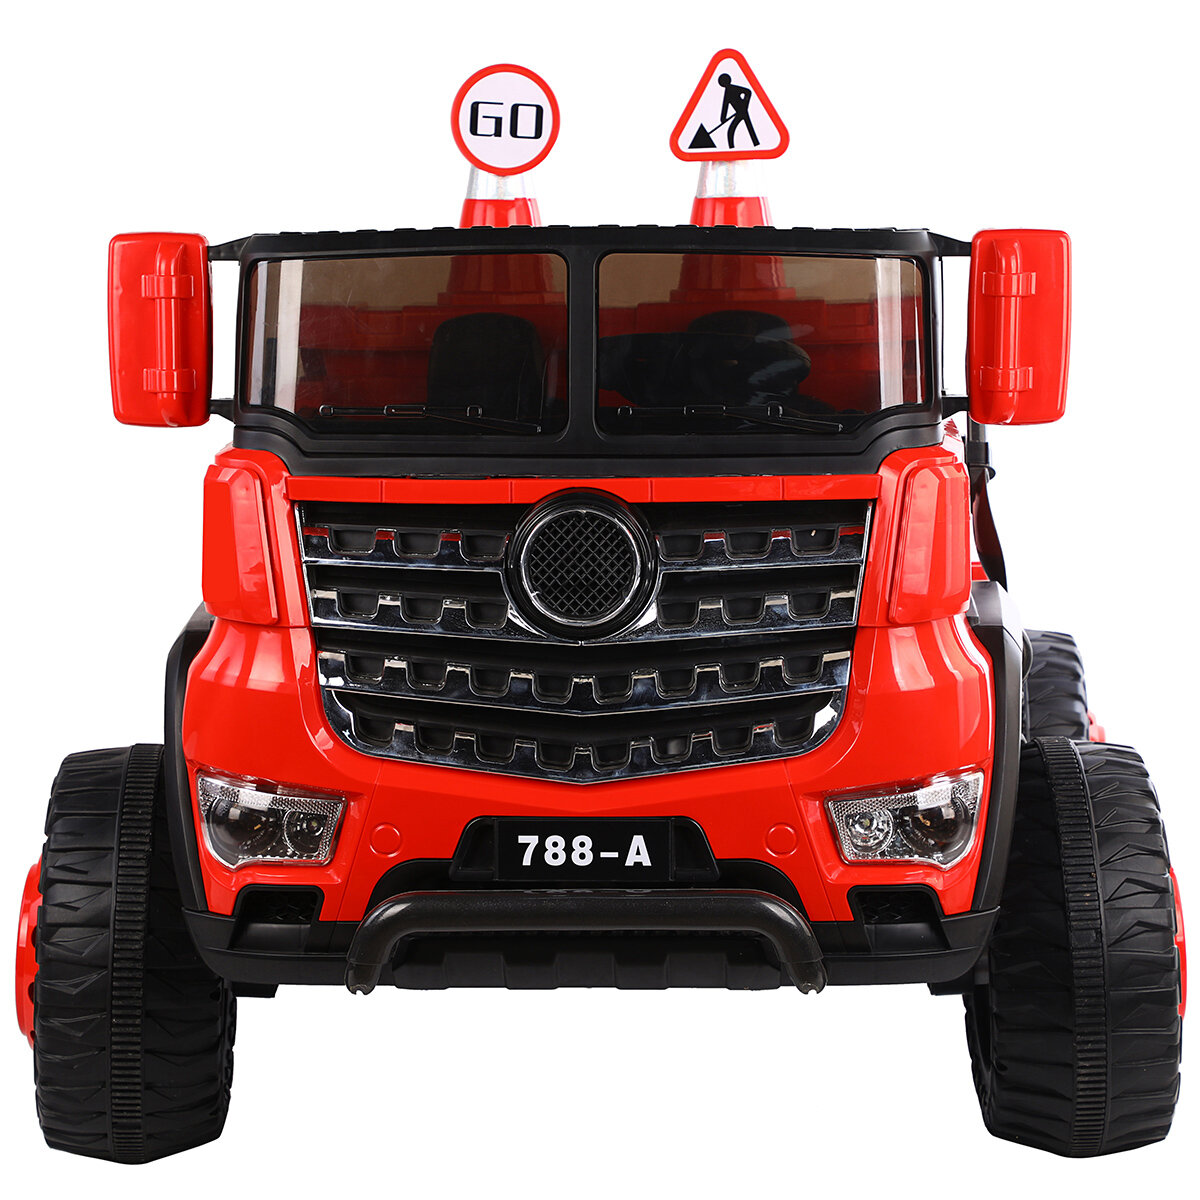 788-A 4WD 2 Seater Ride On for Kids Electric Car390 Motor Plus 12.10 Battery Powered Four-wheel Drive Engineering Vehi